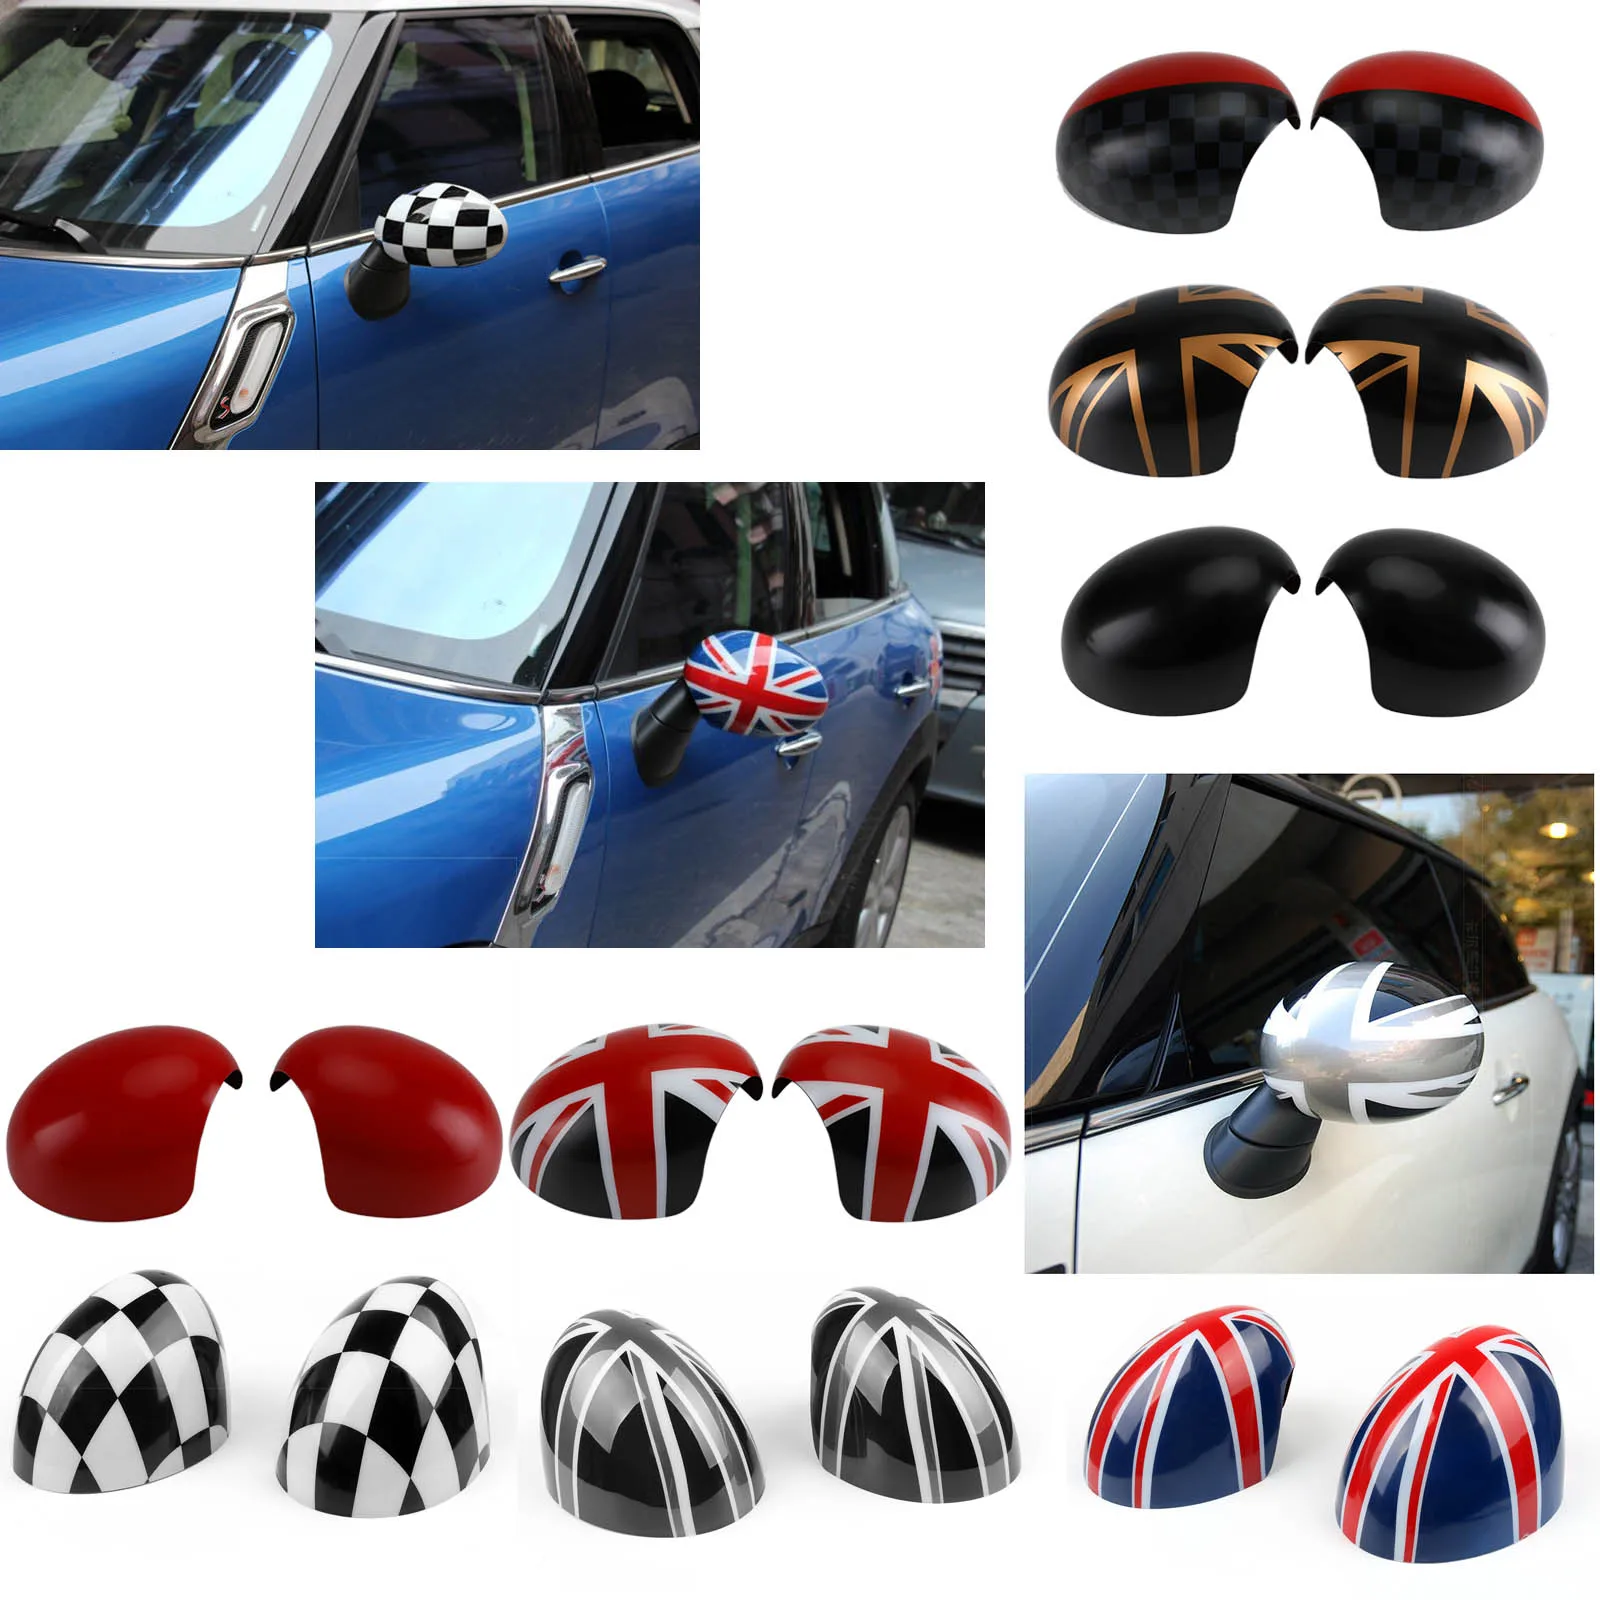 2pcs Door Rear View Mirror Covers Stickers Car-styling For Mini Cooper S Clubman Countryman Paceman R55 R56 R57 R58 R60 R61